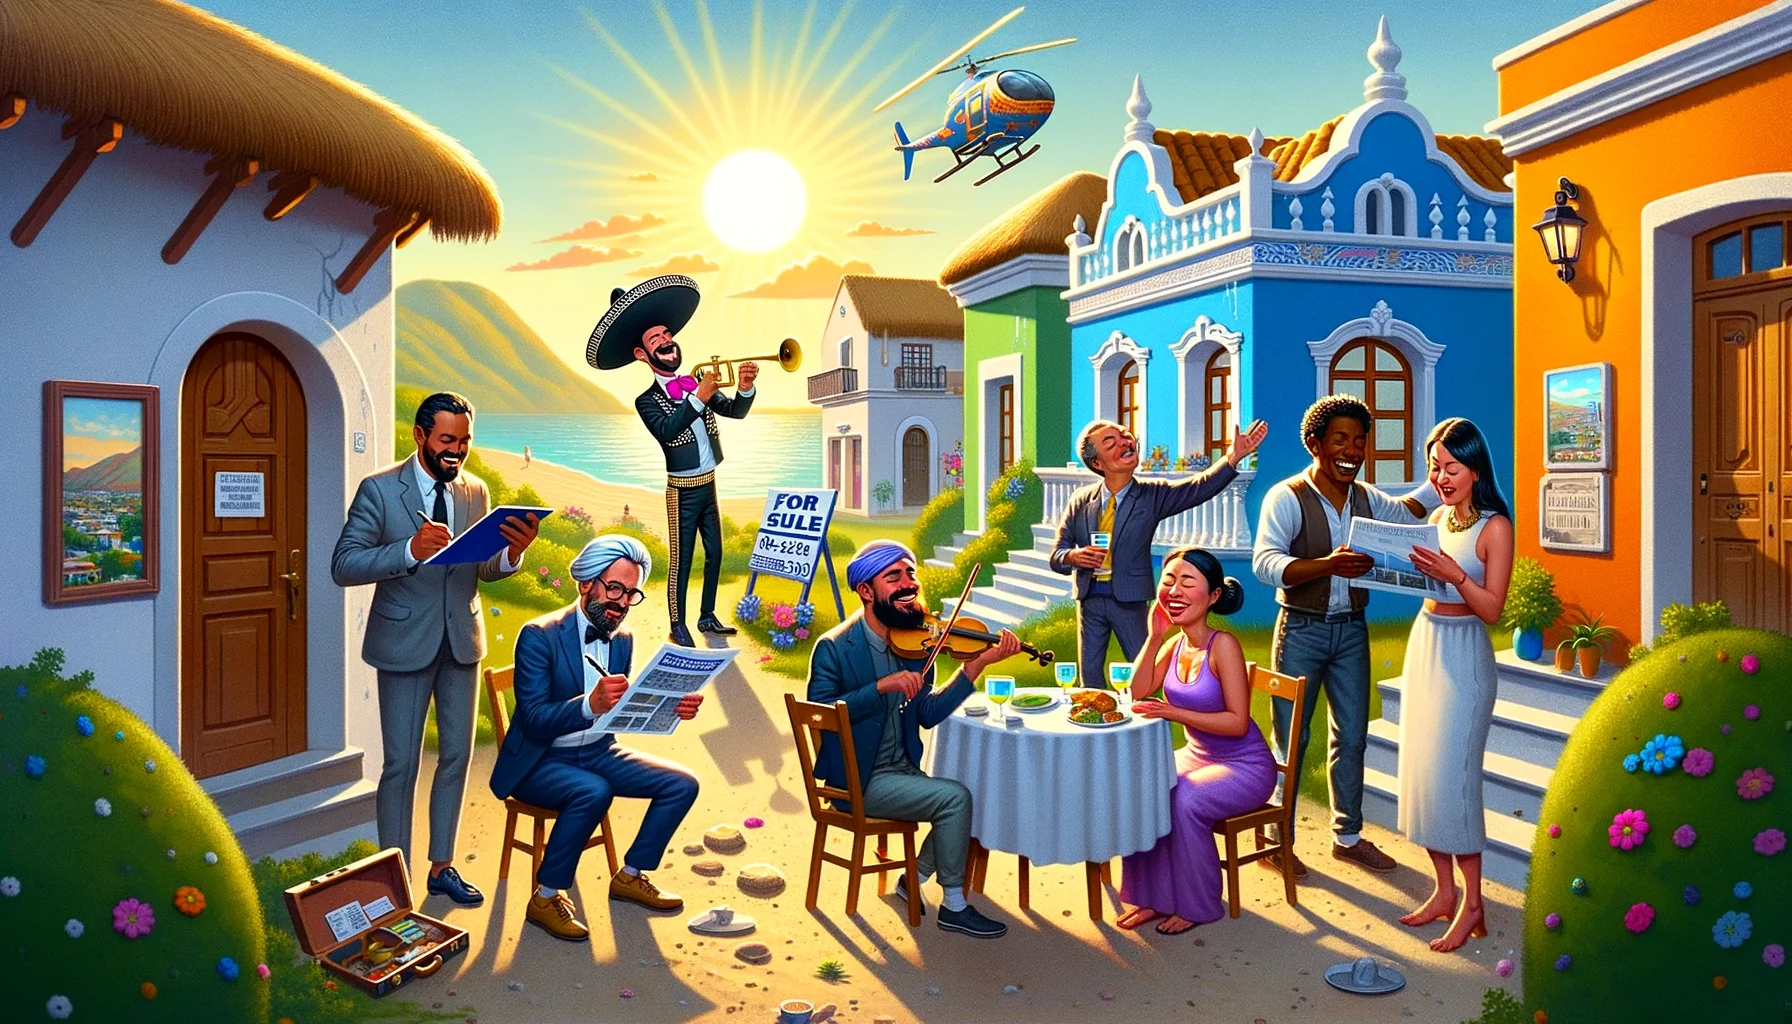 A humorous yet realistic image illustrating the exploration of Mexico's real estate market. Picture a sun-drenched landscape where a diverse mix of people are touring colorful Mexican homes, ranging from charming villas to modern apartments. A Middle-Eastern man takes notes enthusiastically, a South Asian woman negotiates with the agent, and an African woman views a virtual map of available properties. A Hispanic man paints a 'for sale' sign while an Asian woman, soaked in the sunlight, admires a charming blue and white villa. As if a perfect day isn't enough, a mariachi band plays cheerful music in the background, adding to the overall hilarity of the productive and perfect real estate market exploration.